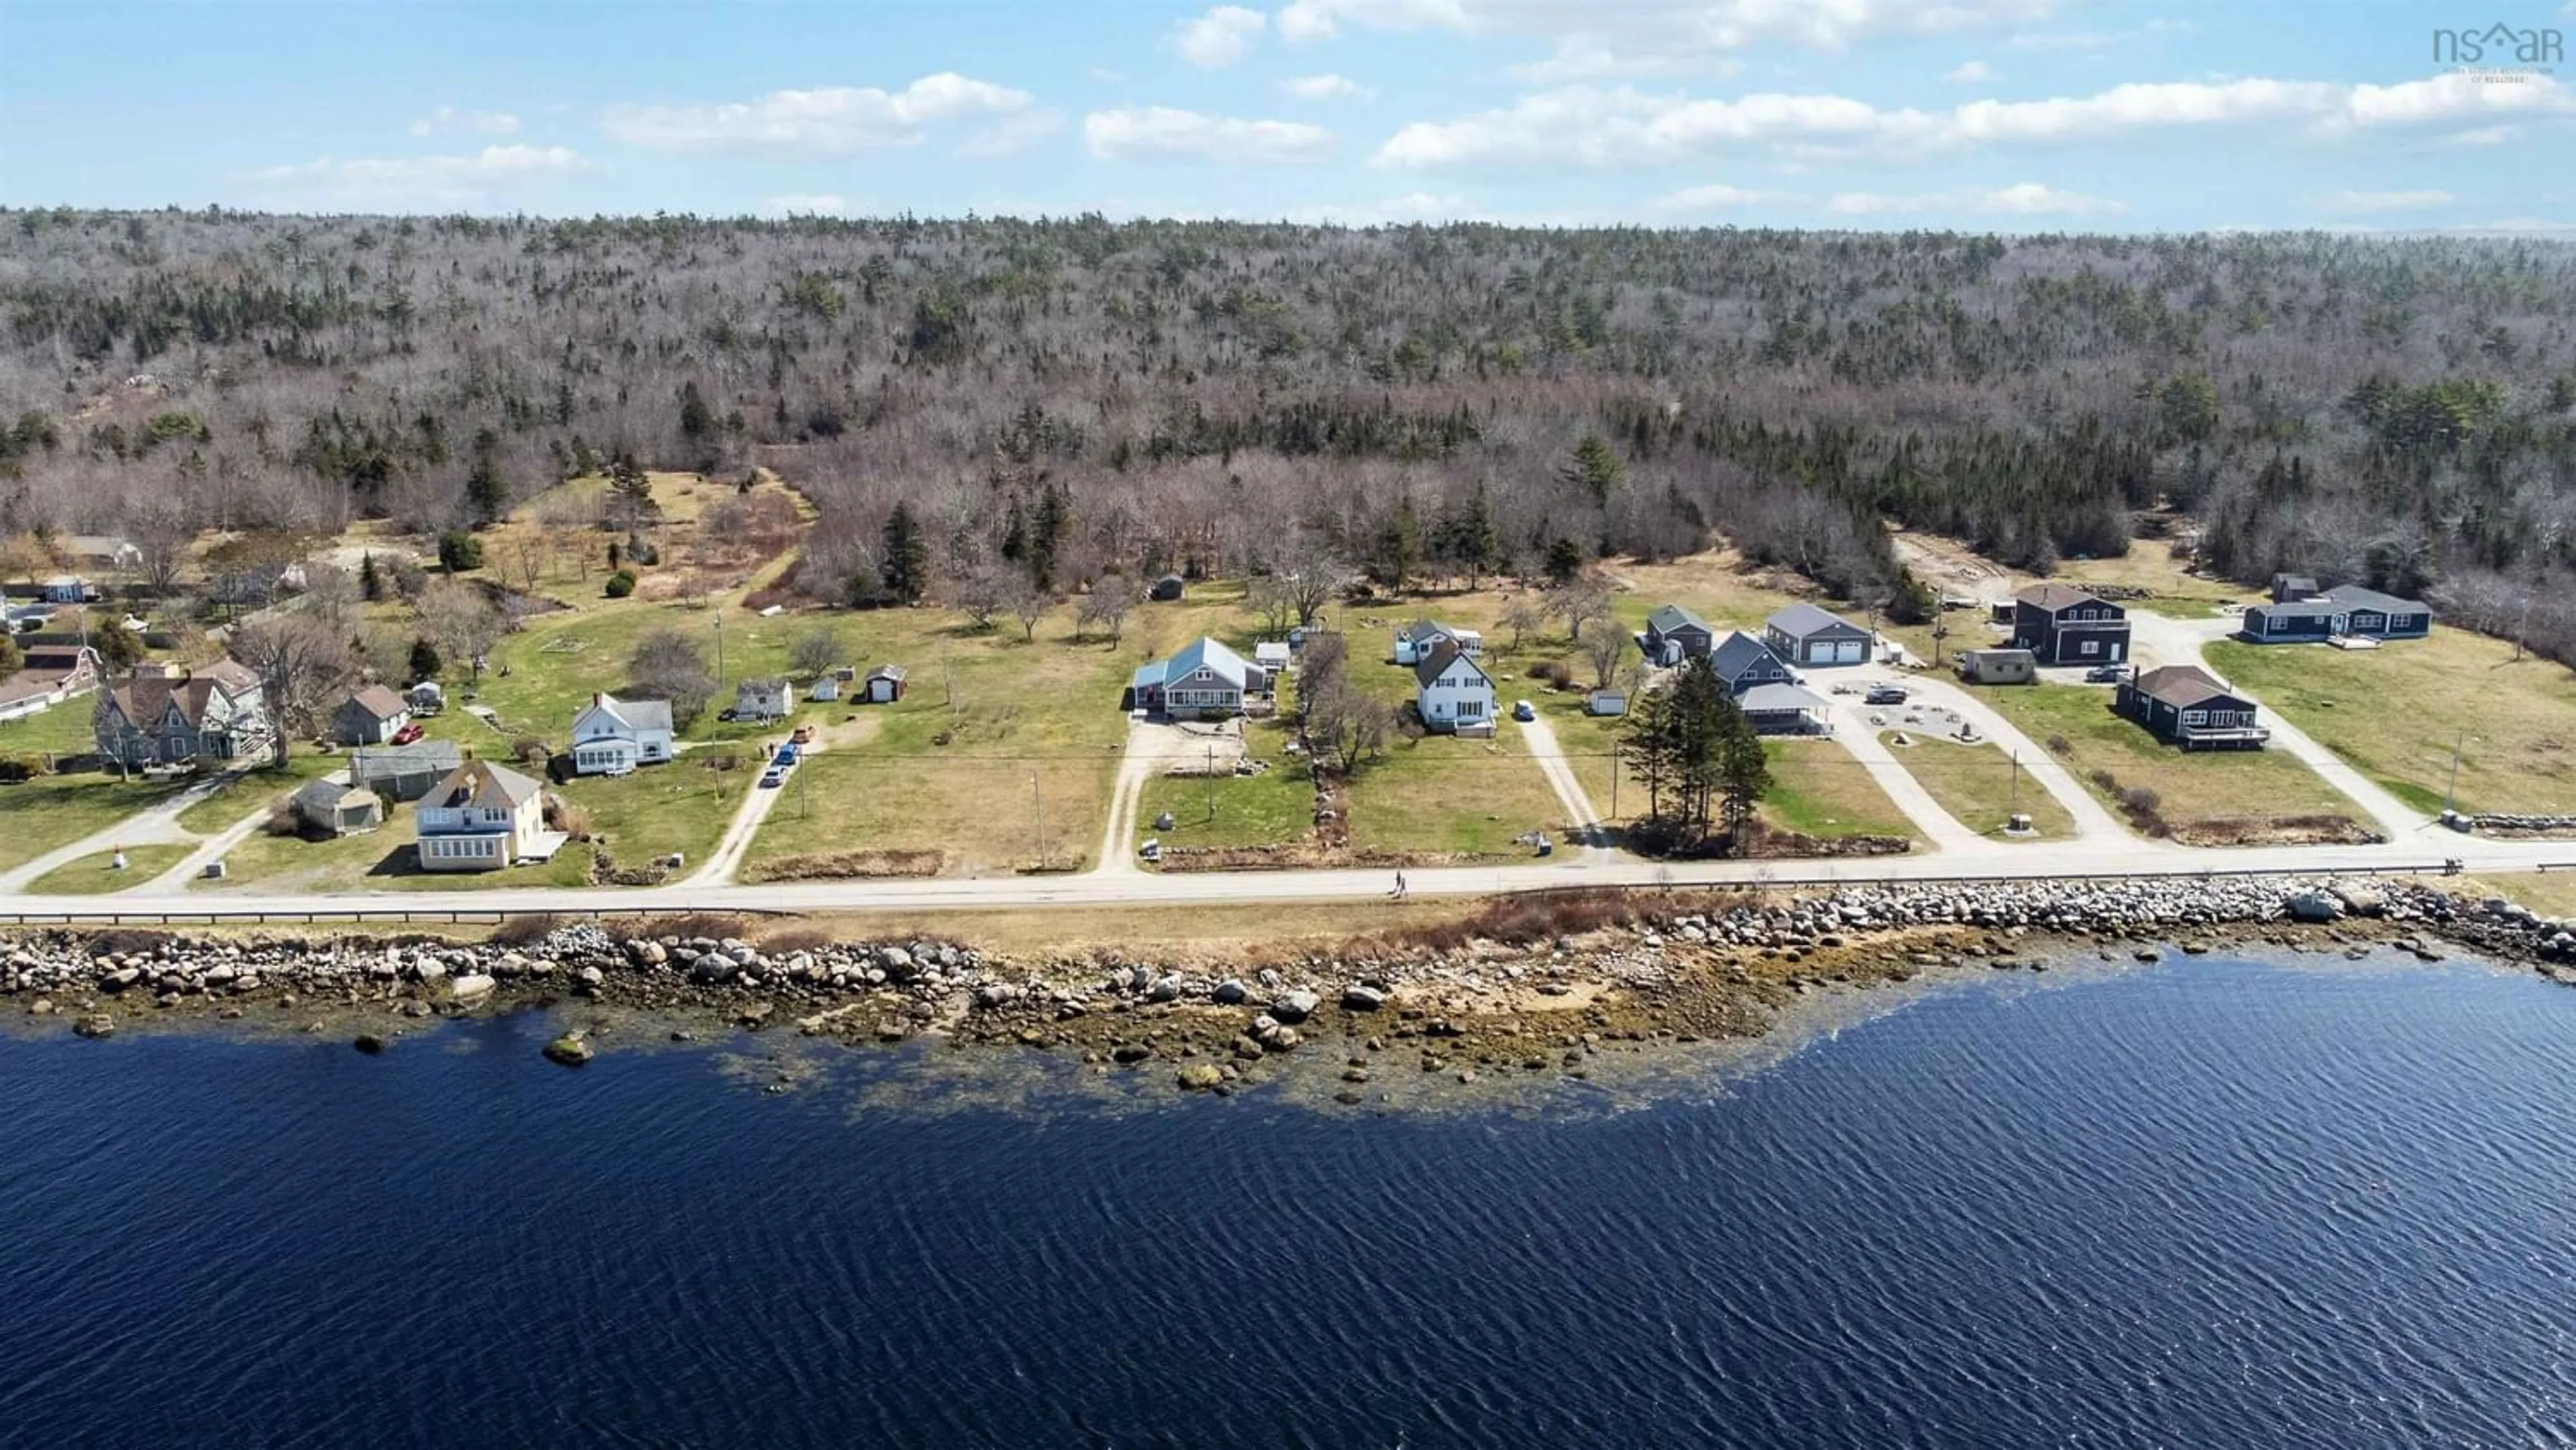 Lakeview for 1267 Sandy Point Rd, Sandy Point Nova Scotia B0T 1W0